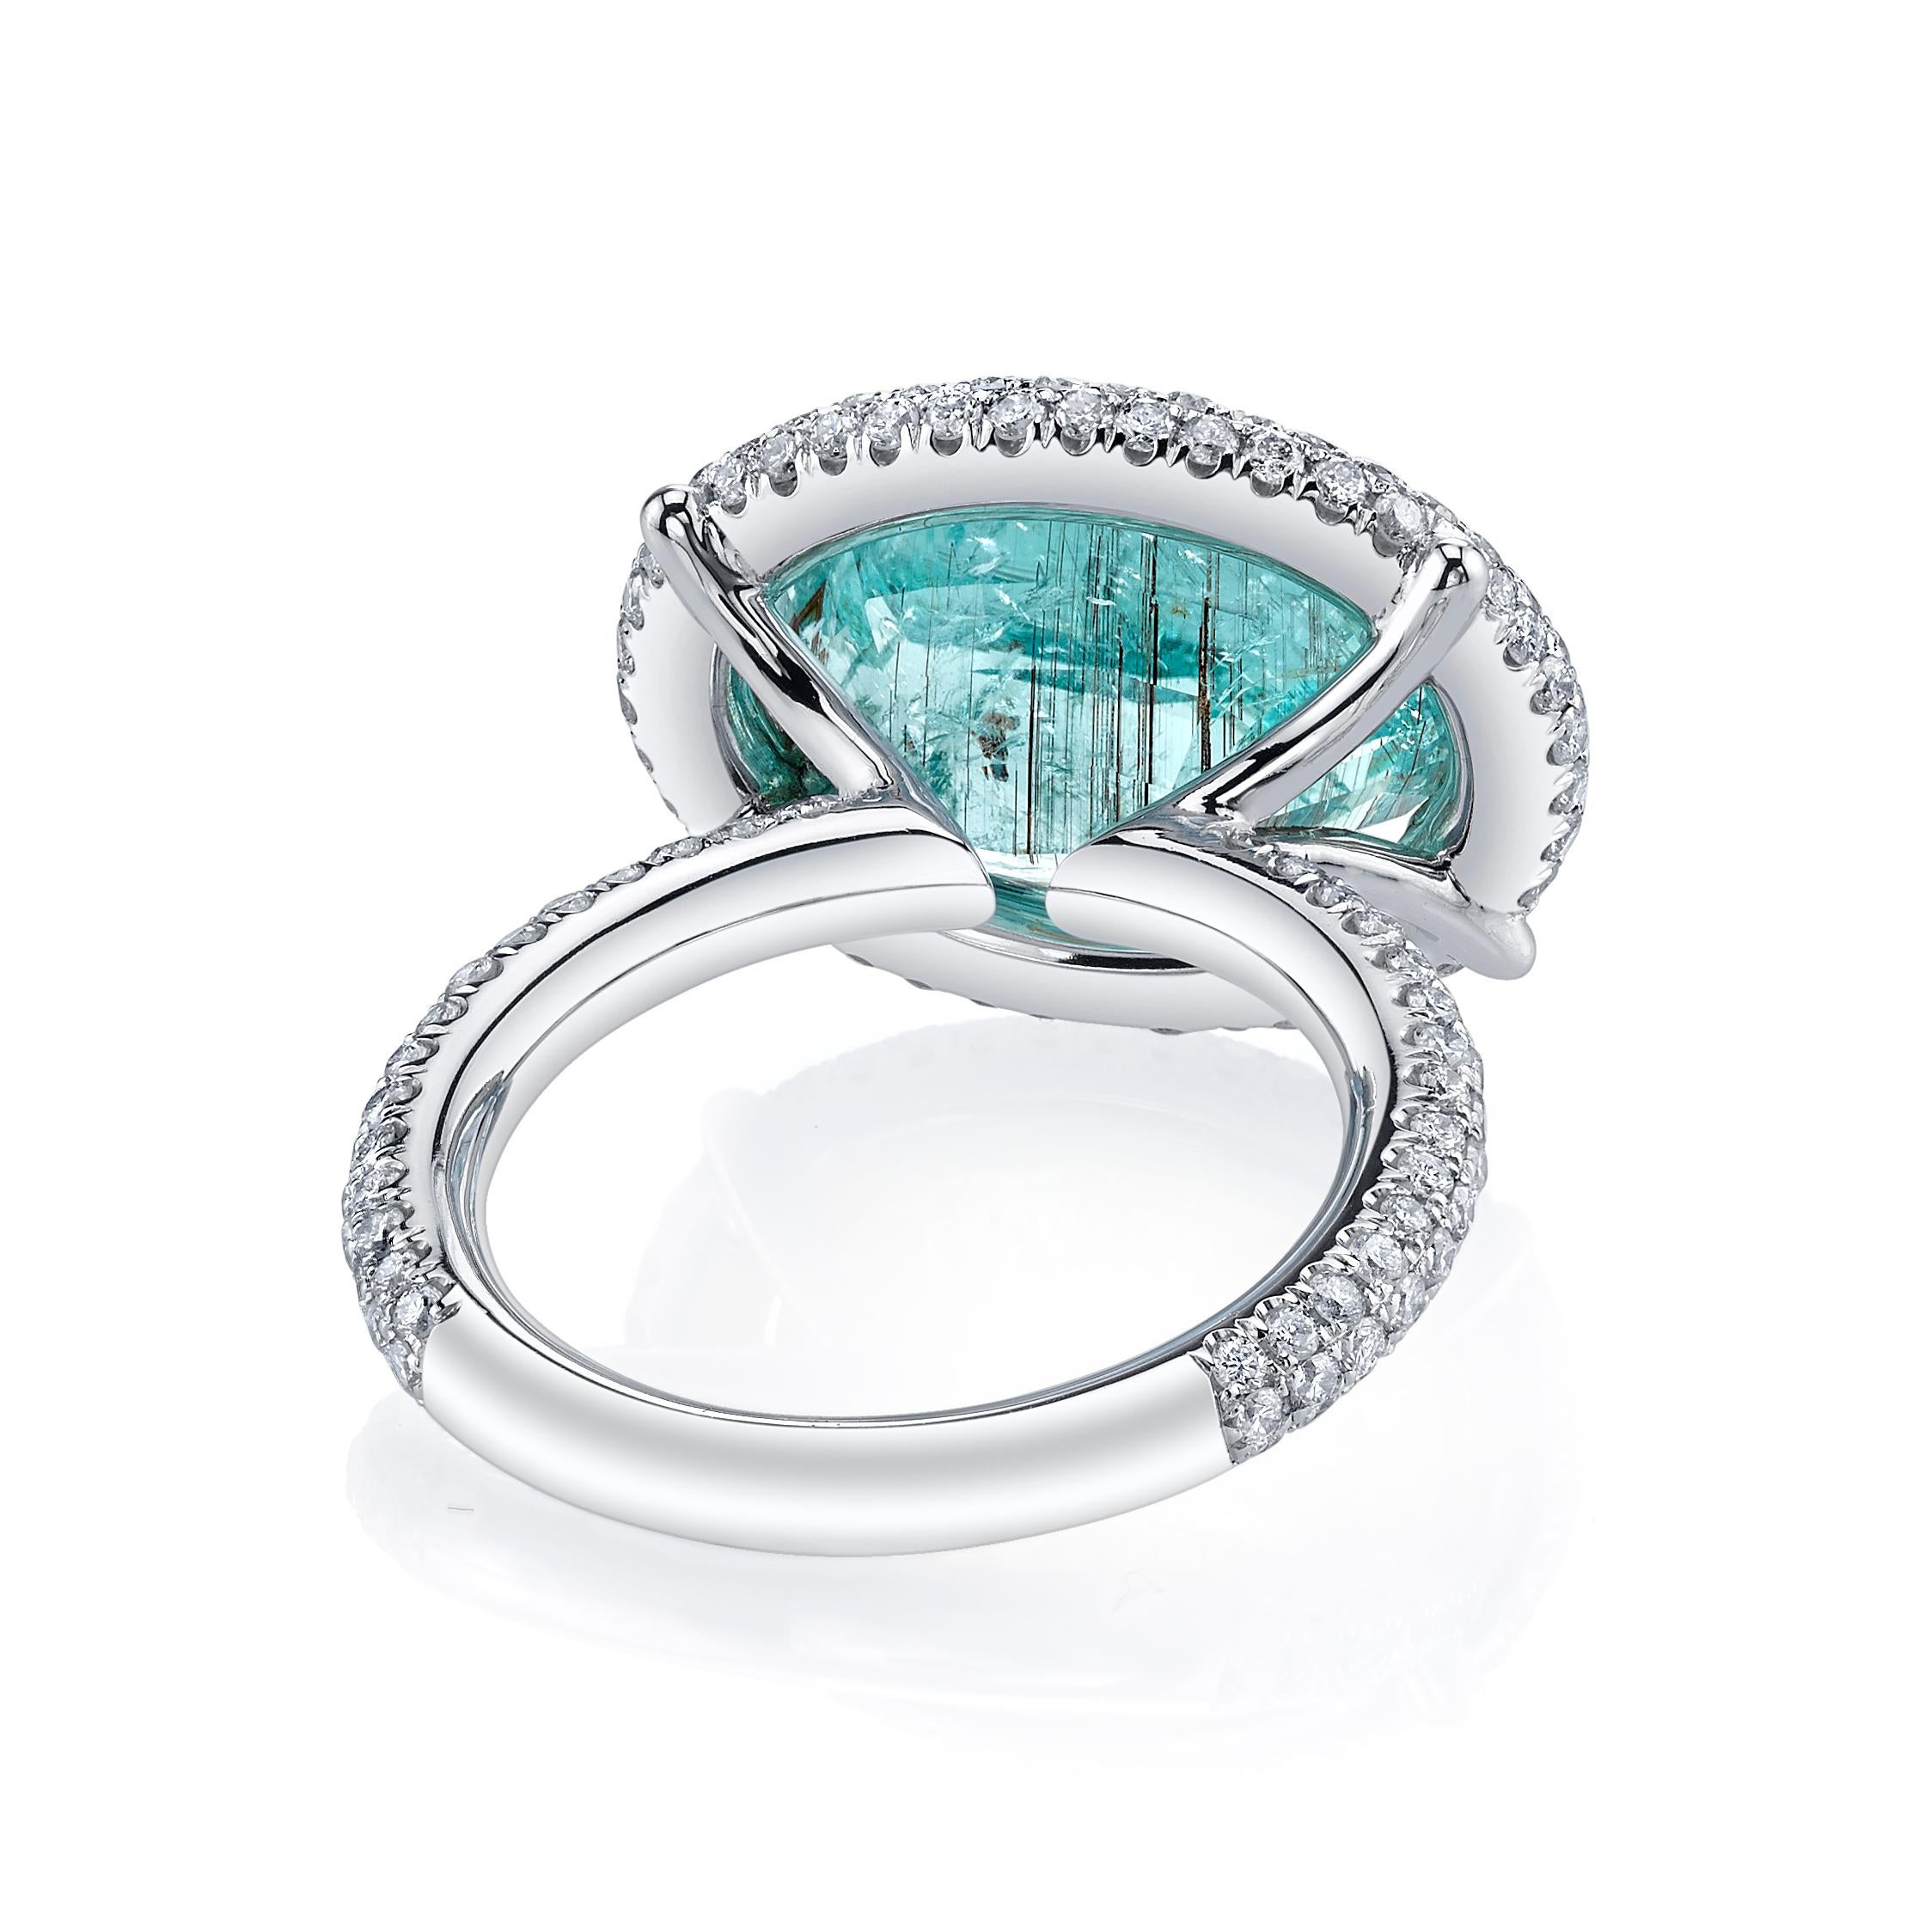 Oval Cut 3.88ct Paraiba Tourmaline Ring Set in Platinum and Accented with Diamonds For Sale